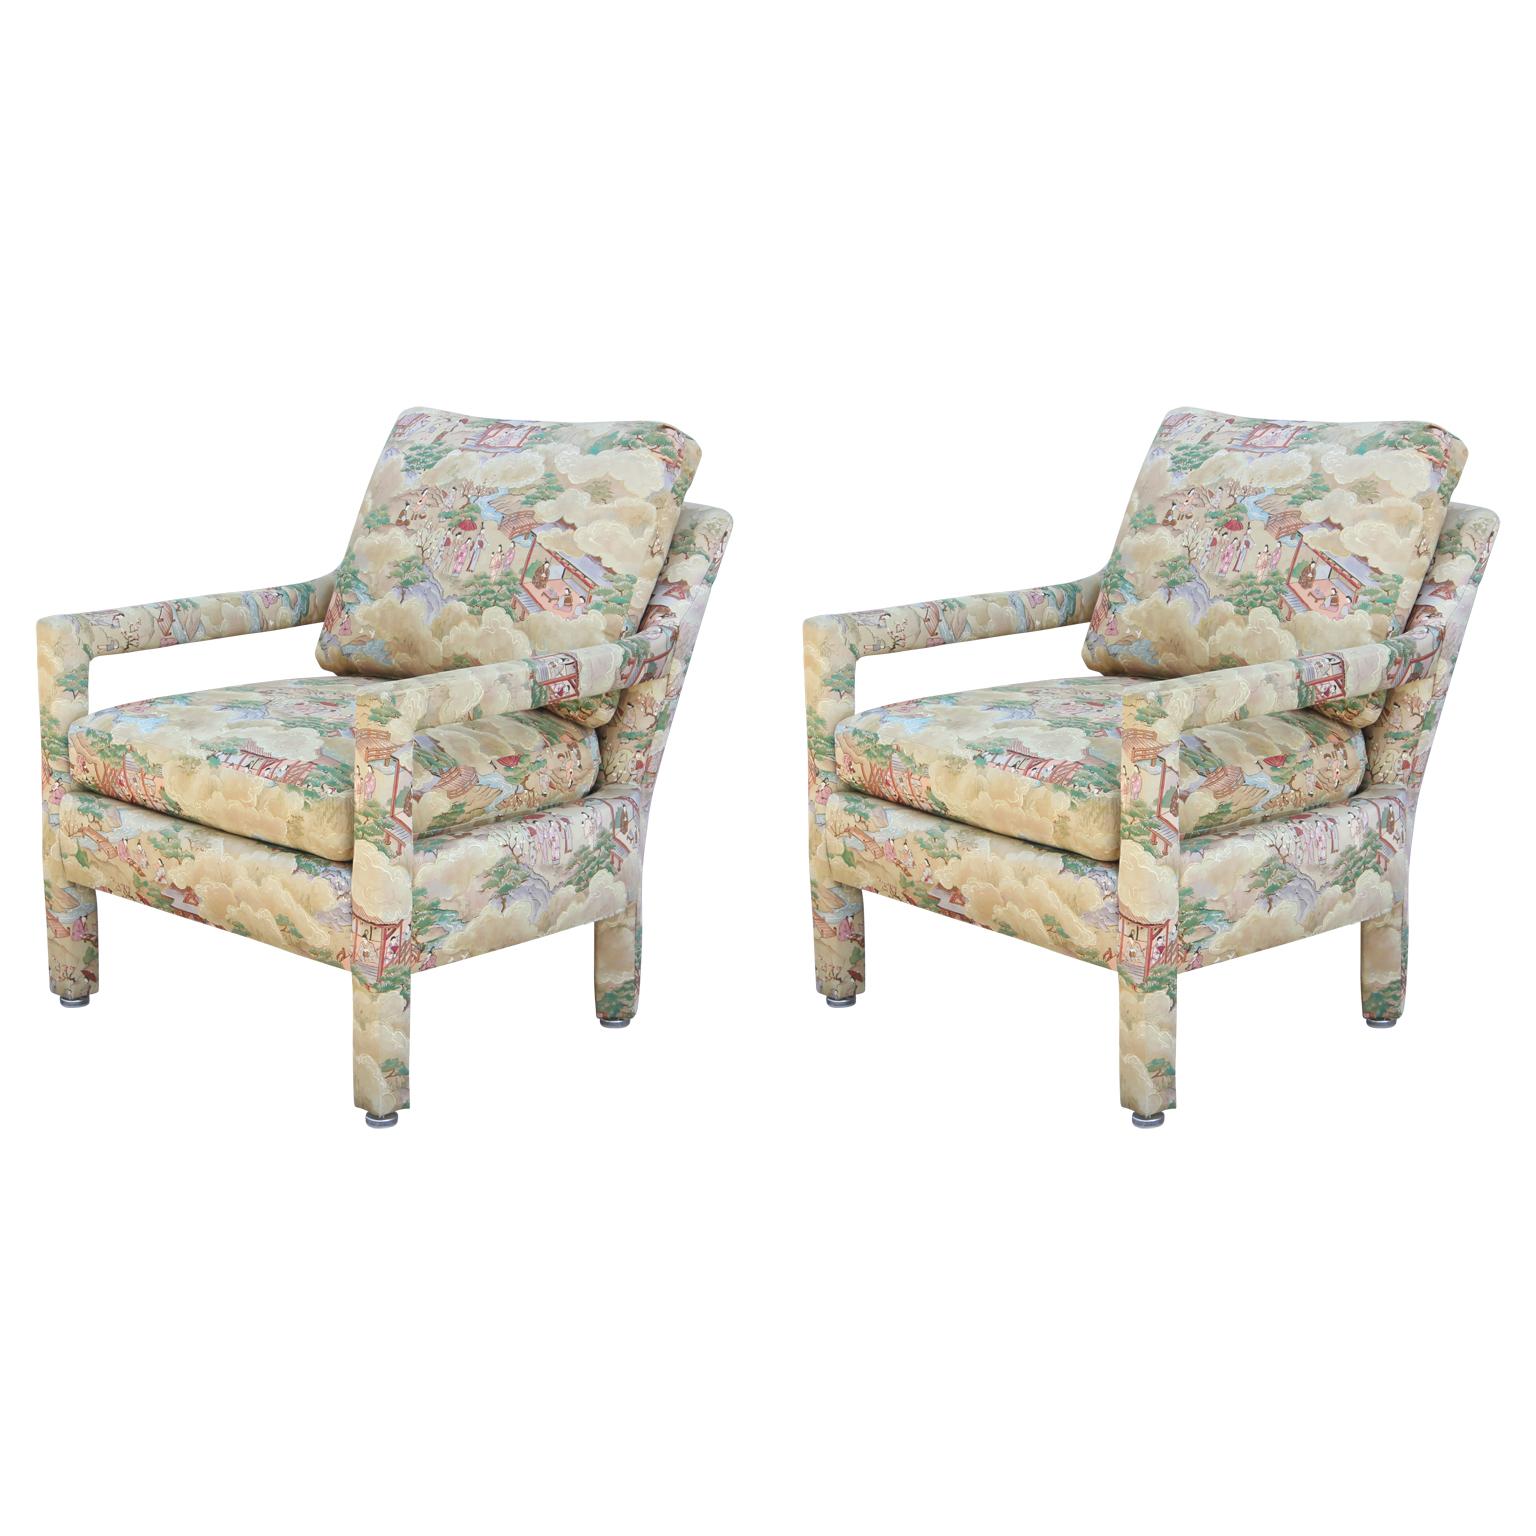 Set of Two Modern Barrel Back Lounge Chairs with Chinoiserie Landscape Fabric